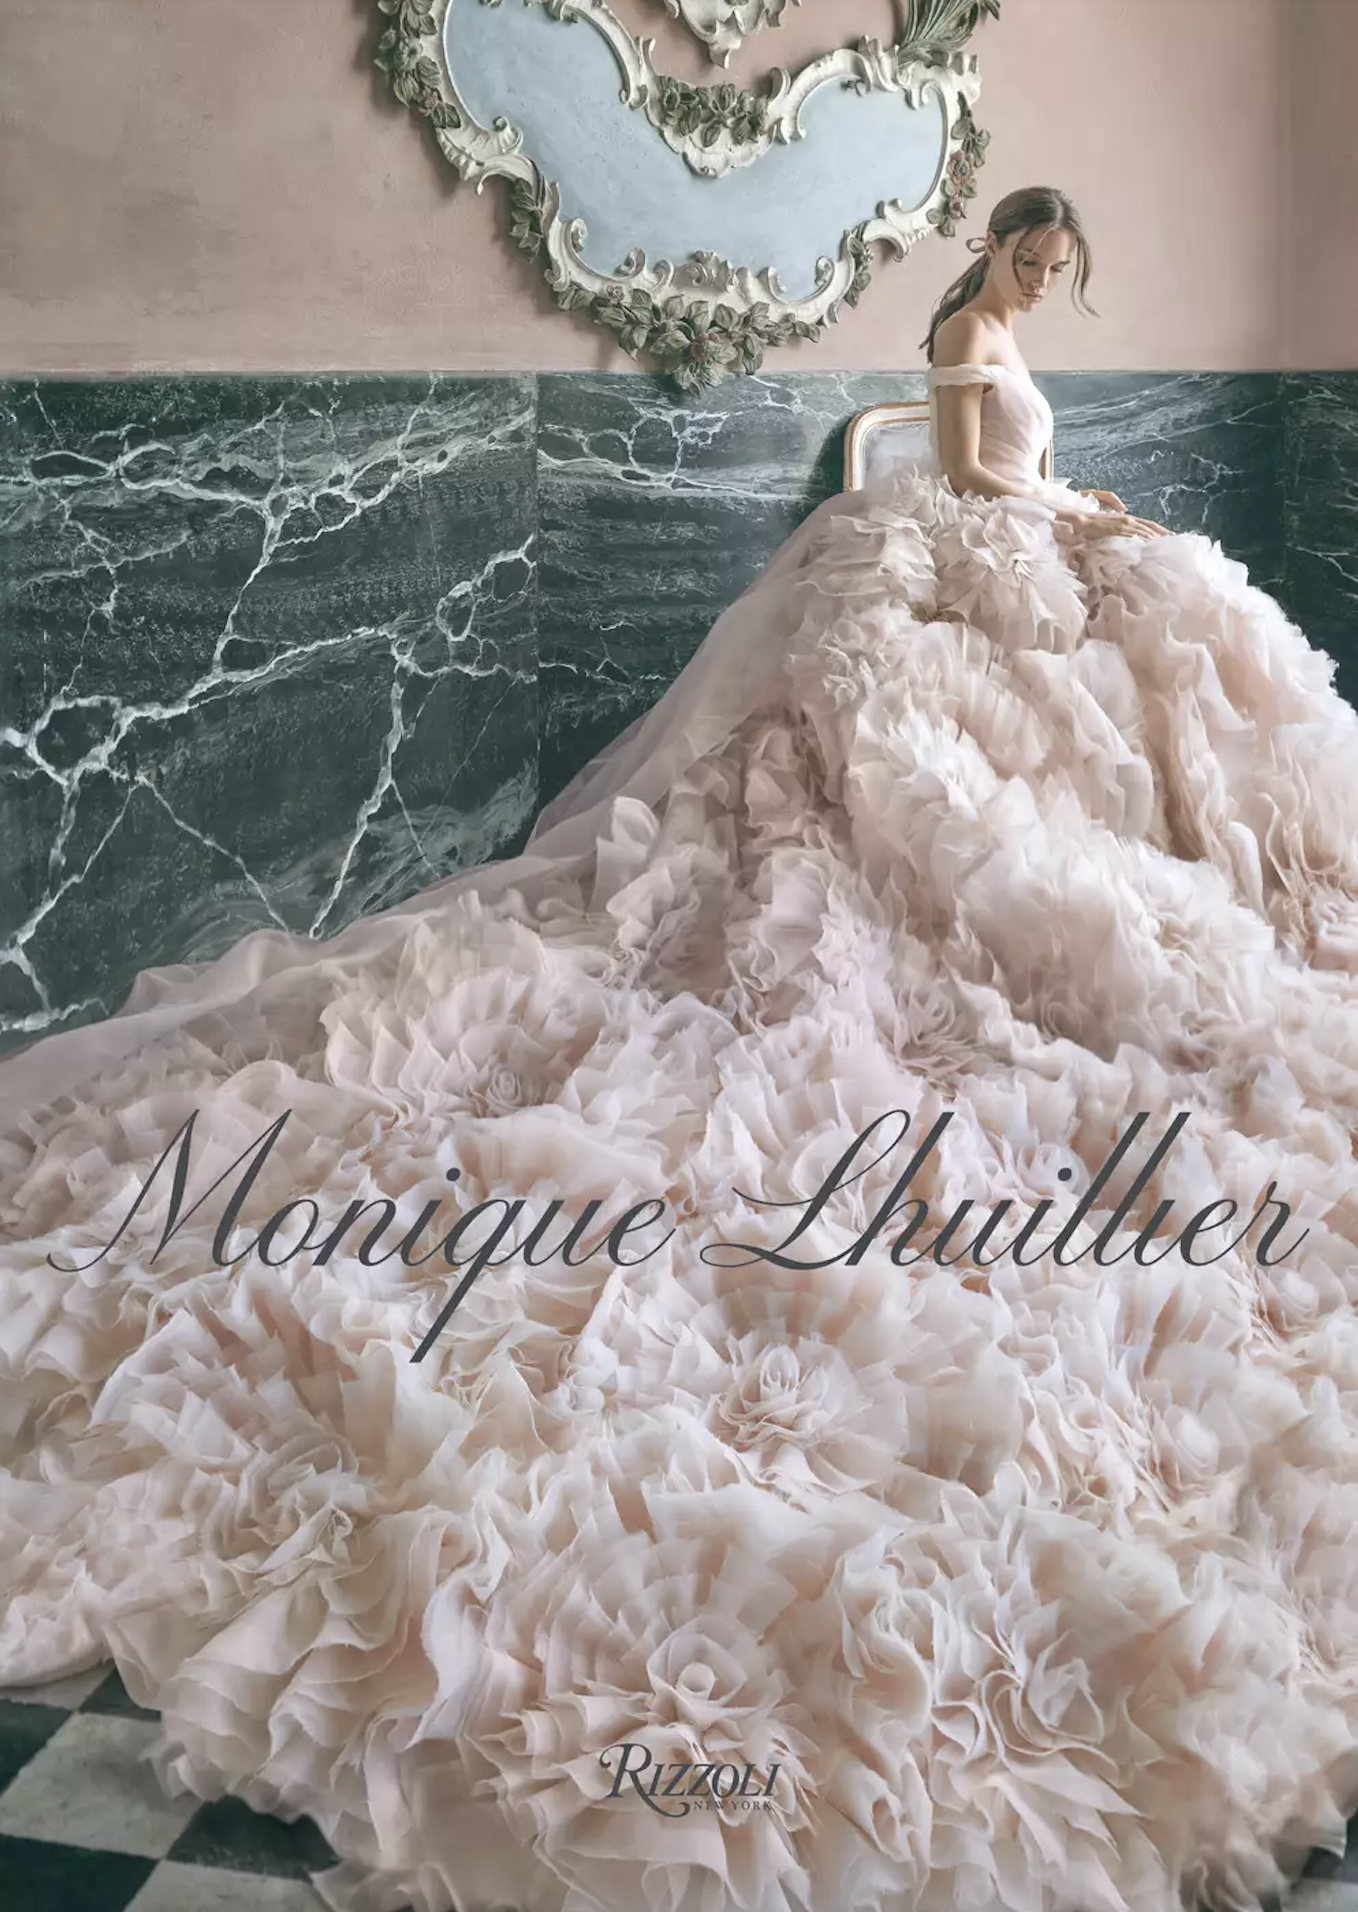 The cover of Monique Lhuilller's book, which features a model seated in a dramatic bridal gown